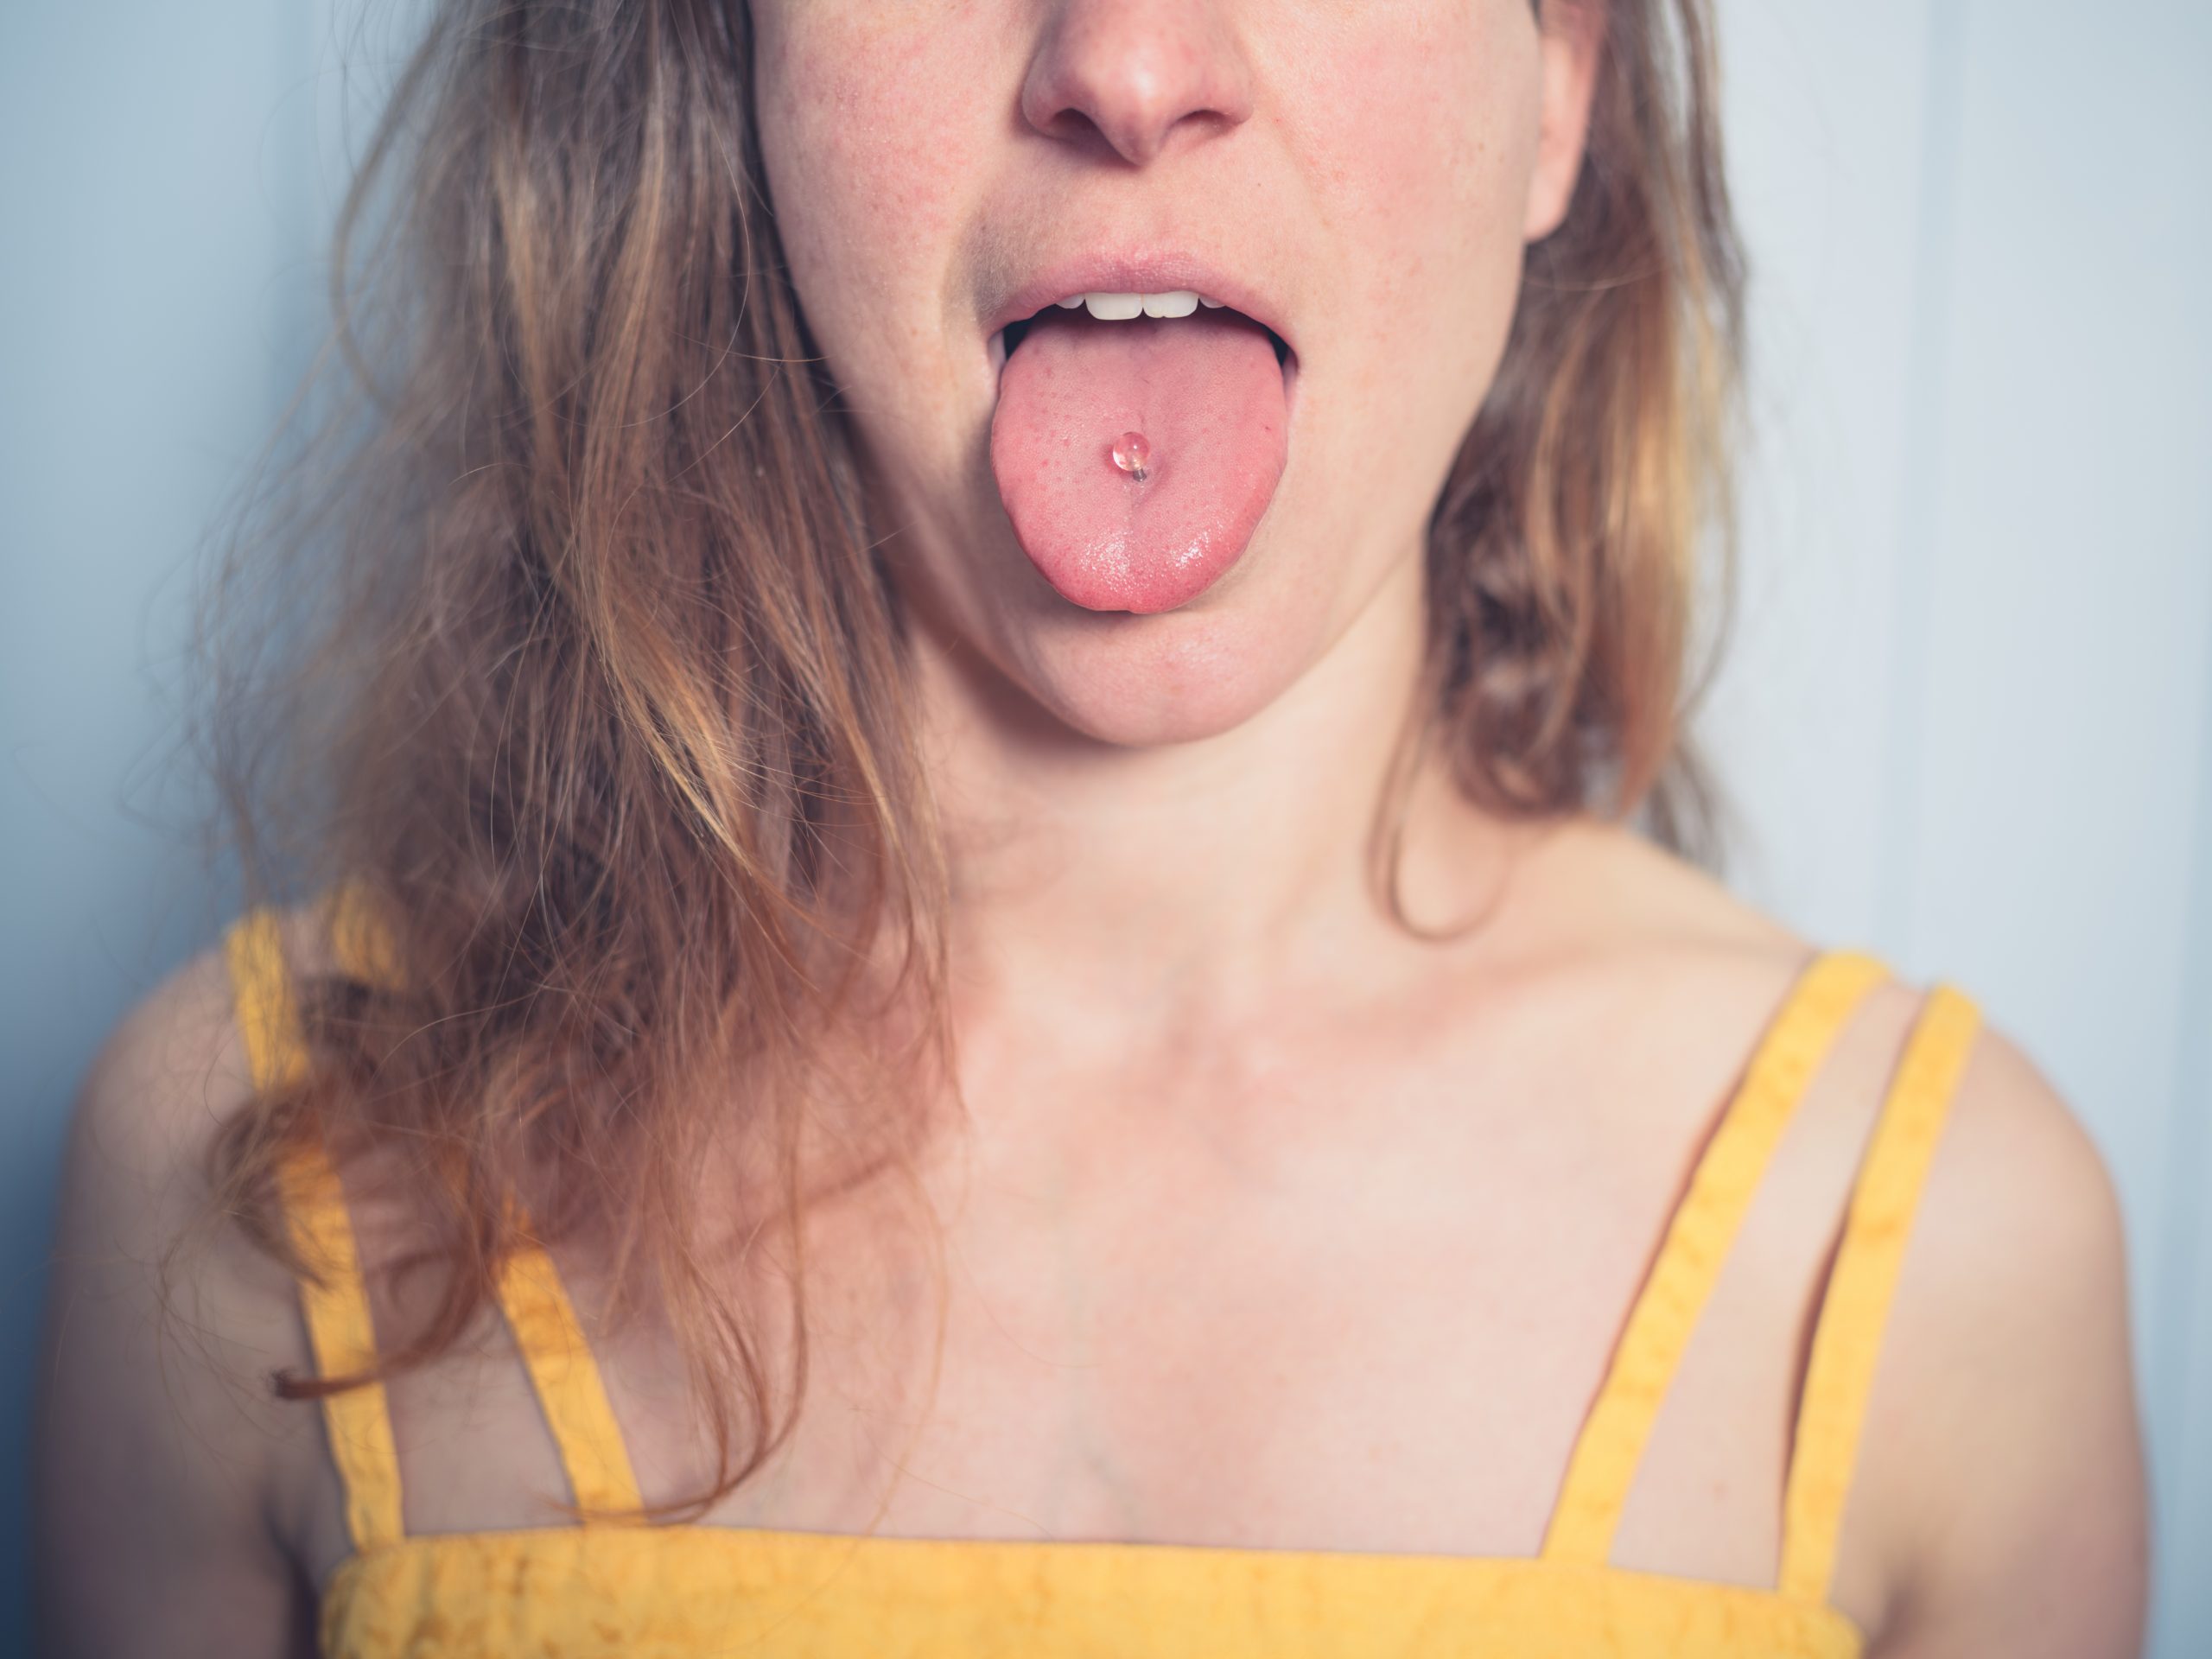 Woman with tongue piercing